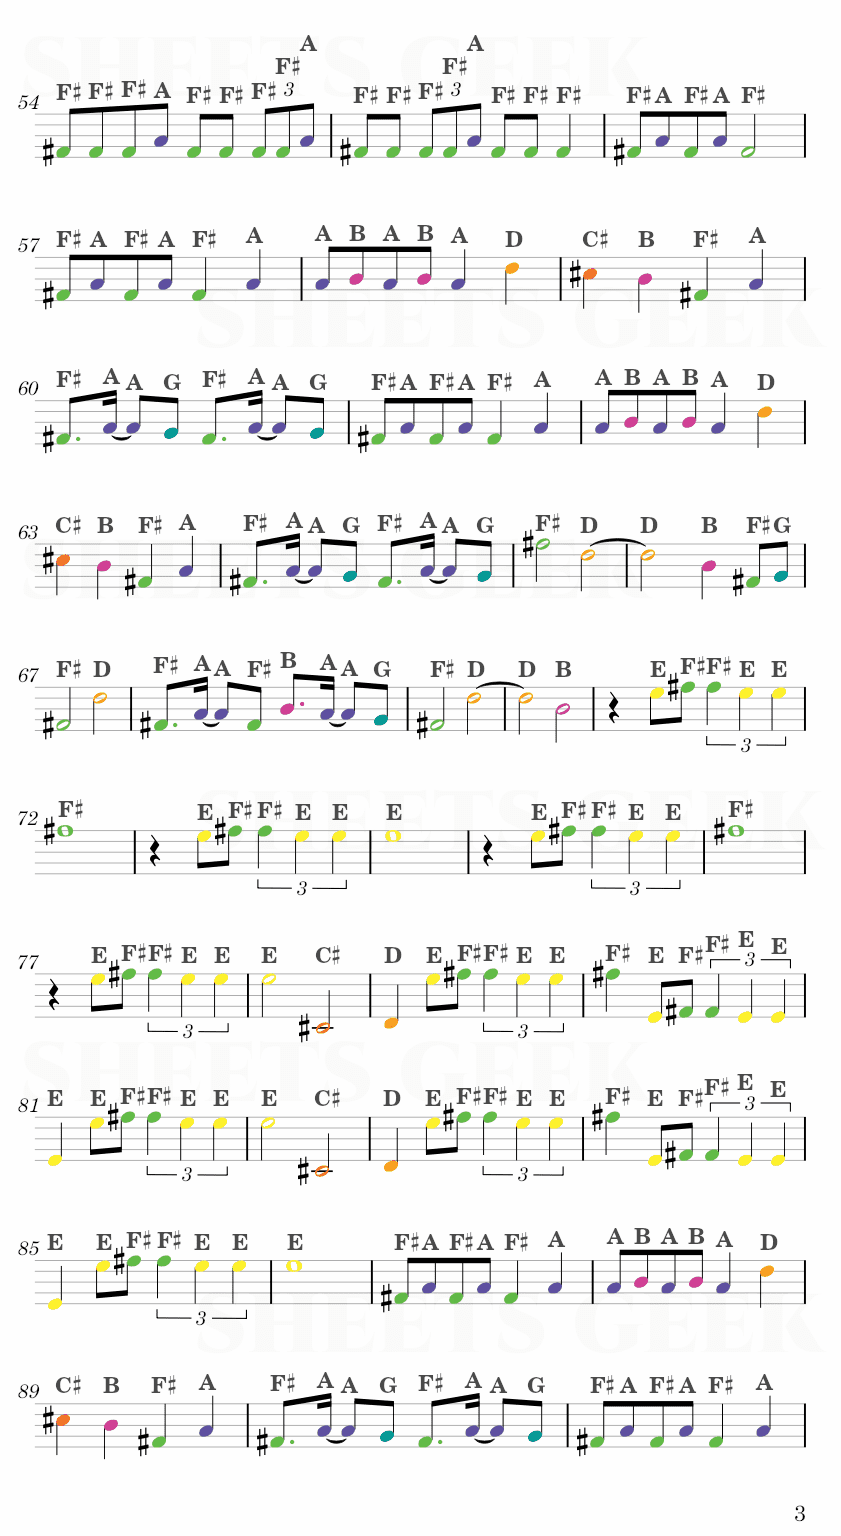 Ride - Twenty One Pilots Easy Sheet Music Free for piano, keyboard, flute, violin, sax, cello page 3